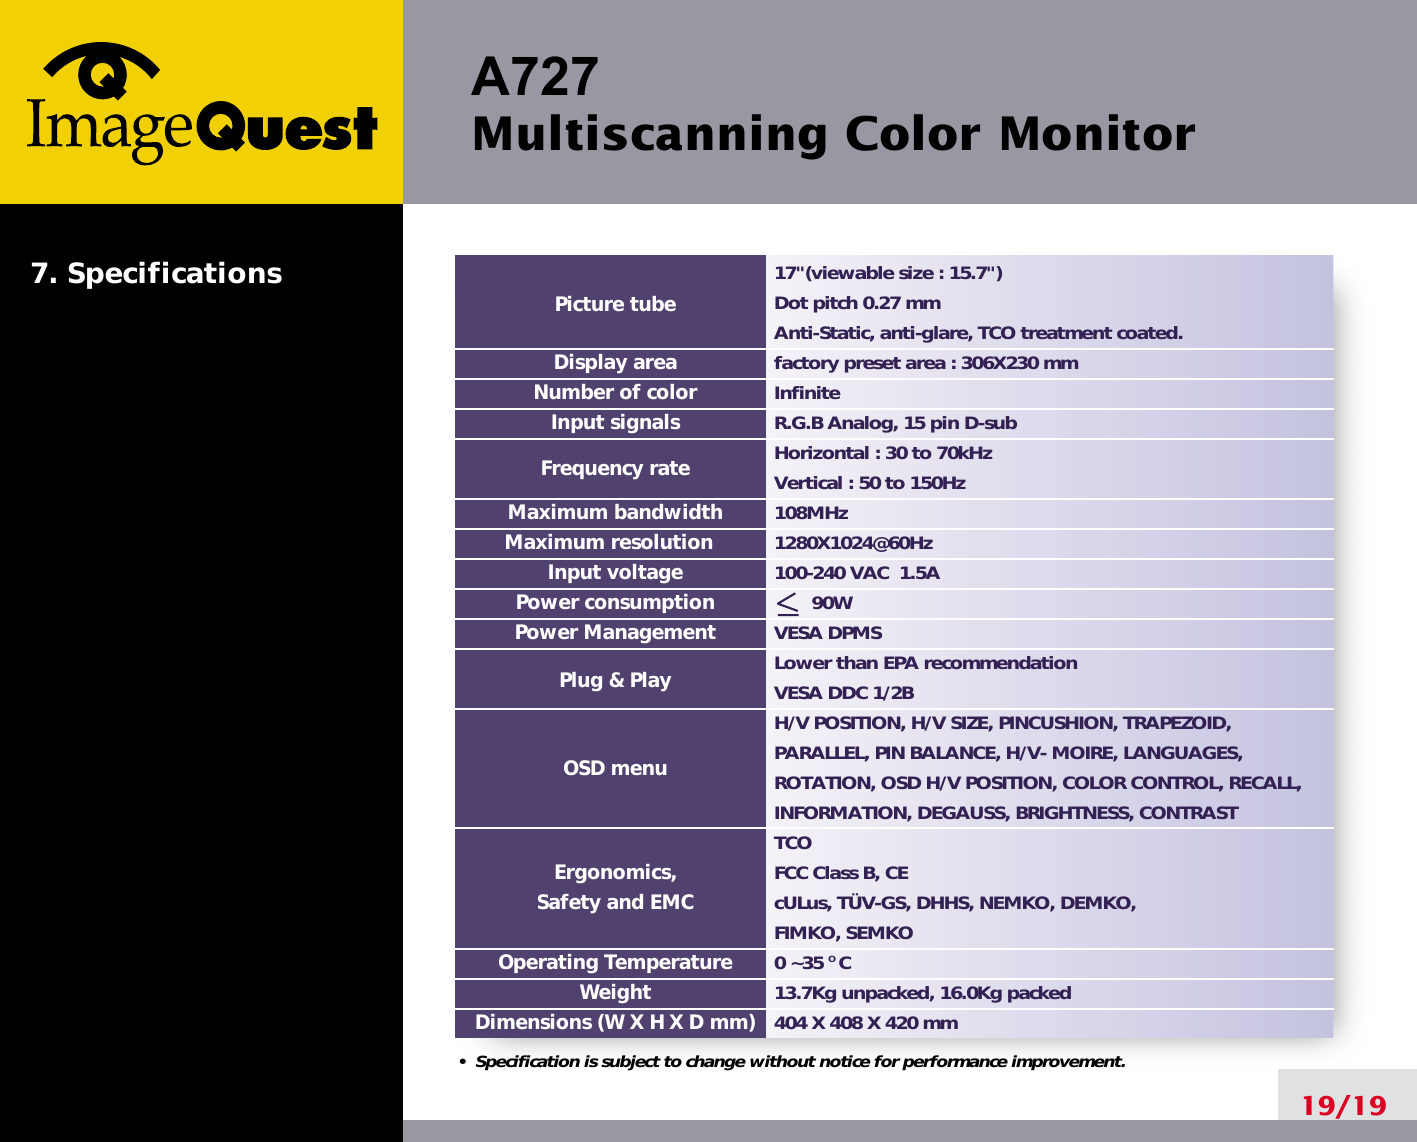 A727 Multiscanning Color Monitor19/1917&quot;(viewable size : 15.7&quot;)Dot pitch 0.27 mmAnti-Static, anti-glare, TCO treatment coated.factory preset area : 306X230 mm InfiniteR.G.B Analog, 15 pin D-subHorizontal : 30 to 70kHzVertical : 50 to 150Hz108MHz1280X1024@60Hz100-240 VAC  1.5A        90W VESA DPMSLower than EPA recommendationVESA DDC 1/2BH/V POSITION, H/V SIZE, PINCUSHION, TRAPEZOID,PARALLEL, PIN BALANCE, H/V- MOIRE, LANGUAGES,ROTATION, OSD H/V POSITION, COLOR CONTROL, RECALL,INFORMATION, DEGAUSS, BRIGHTNESS, CONTRASTTCOFCC Class B, CEcULus, TÜV-GS, DHHS, NEMKO, DEMKO,FIMKO, SEMKO0 ~35 O C13.7Kg unpacked, 16.0Kg packed404 X 408 X 420 mmPicture tubeDisplay areaNumber of colorInput signalsFrequency rateMaximum bandwidthMaximum resolutionInput voltagePower consumptionPower ManagementPlug &amp; PlayOSD menuErgonomics,Safety and EMCOperating TemperatureWeightDimensions (W X H X D mm)•  Specification is subject to change without notice for performance improvement.7. Specifications